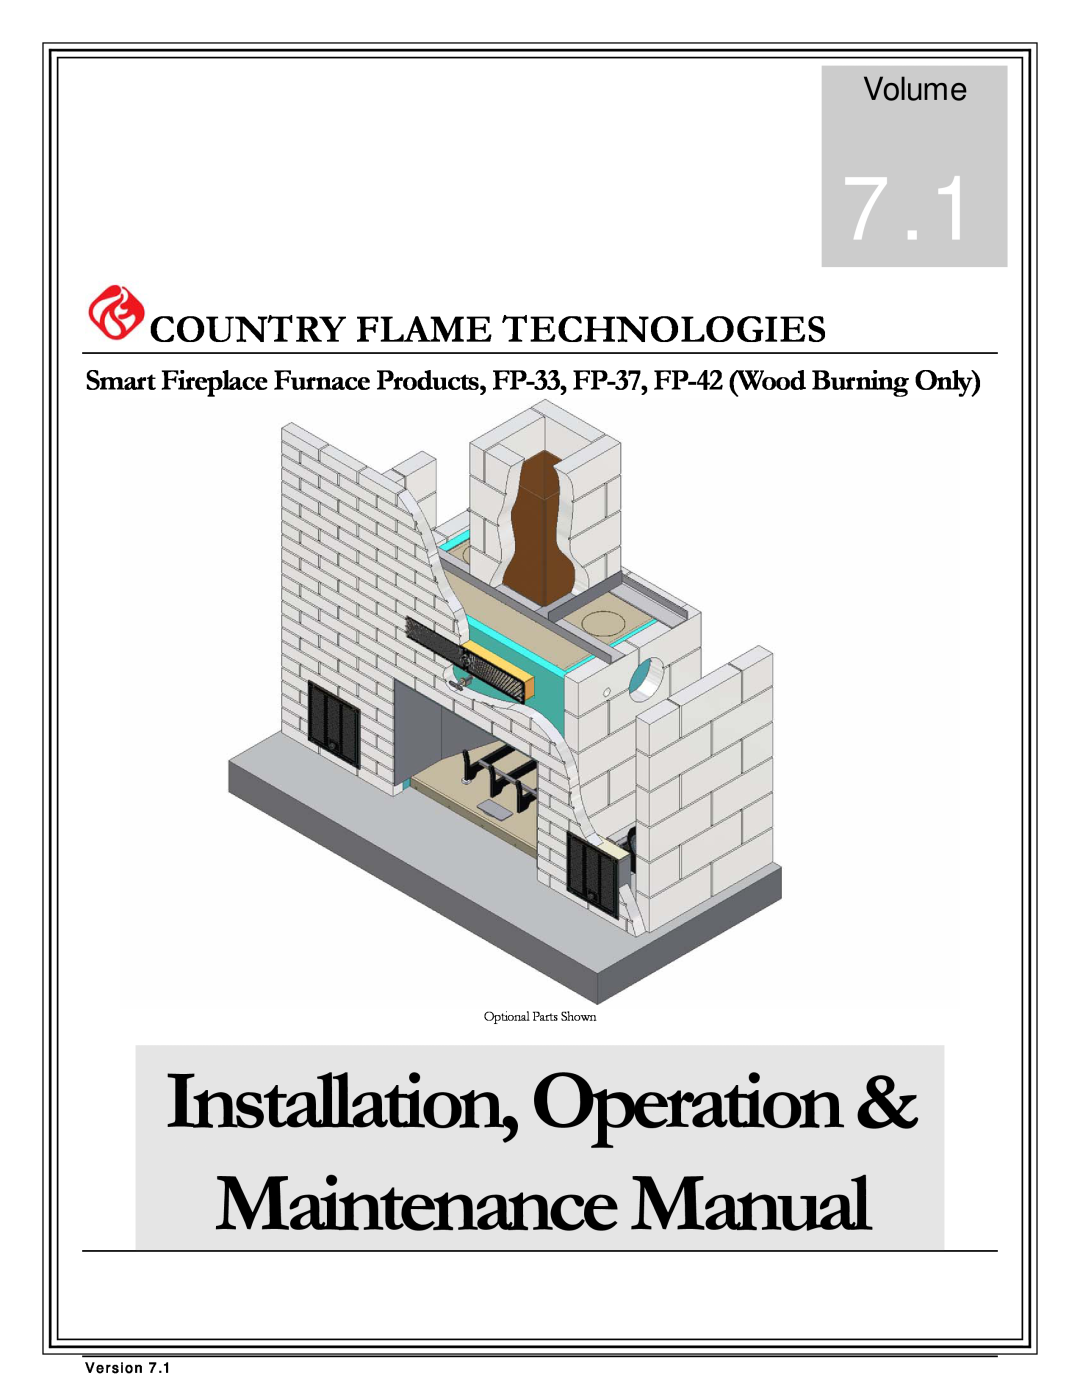 Country Flame FP37, FP42 manual Volume, Installation,Operation& MaintenanceManual, Country Flame Technologies, Version 